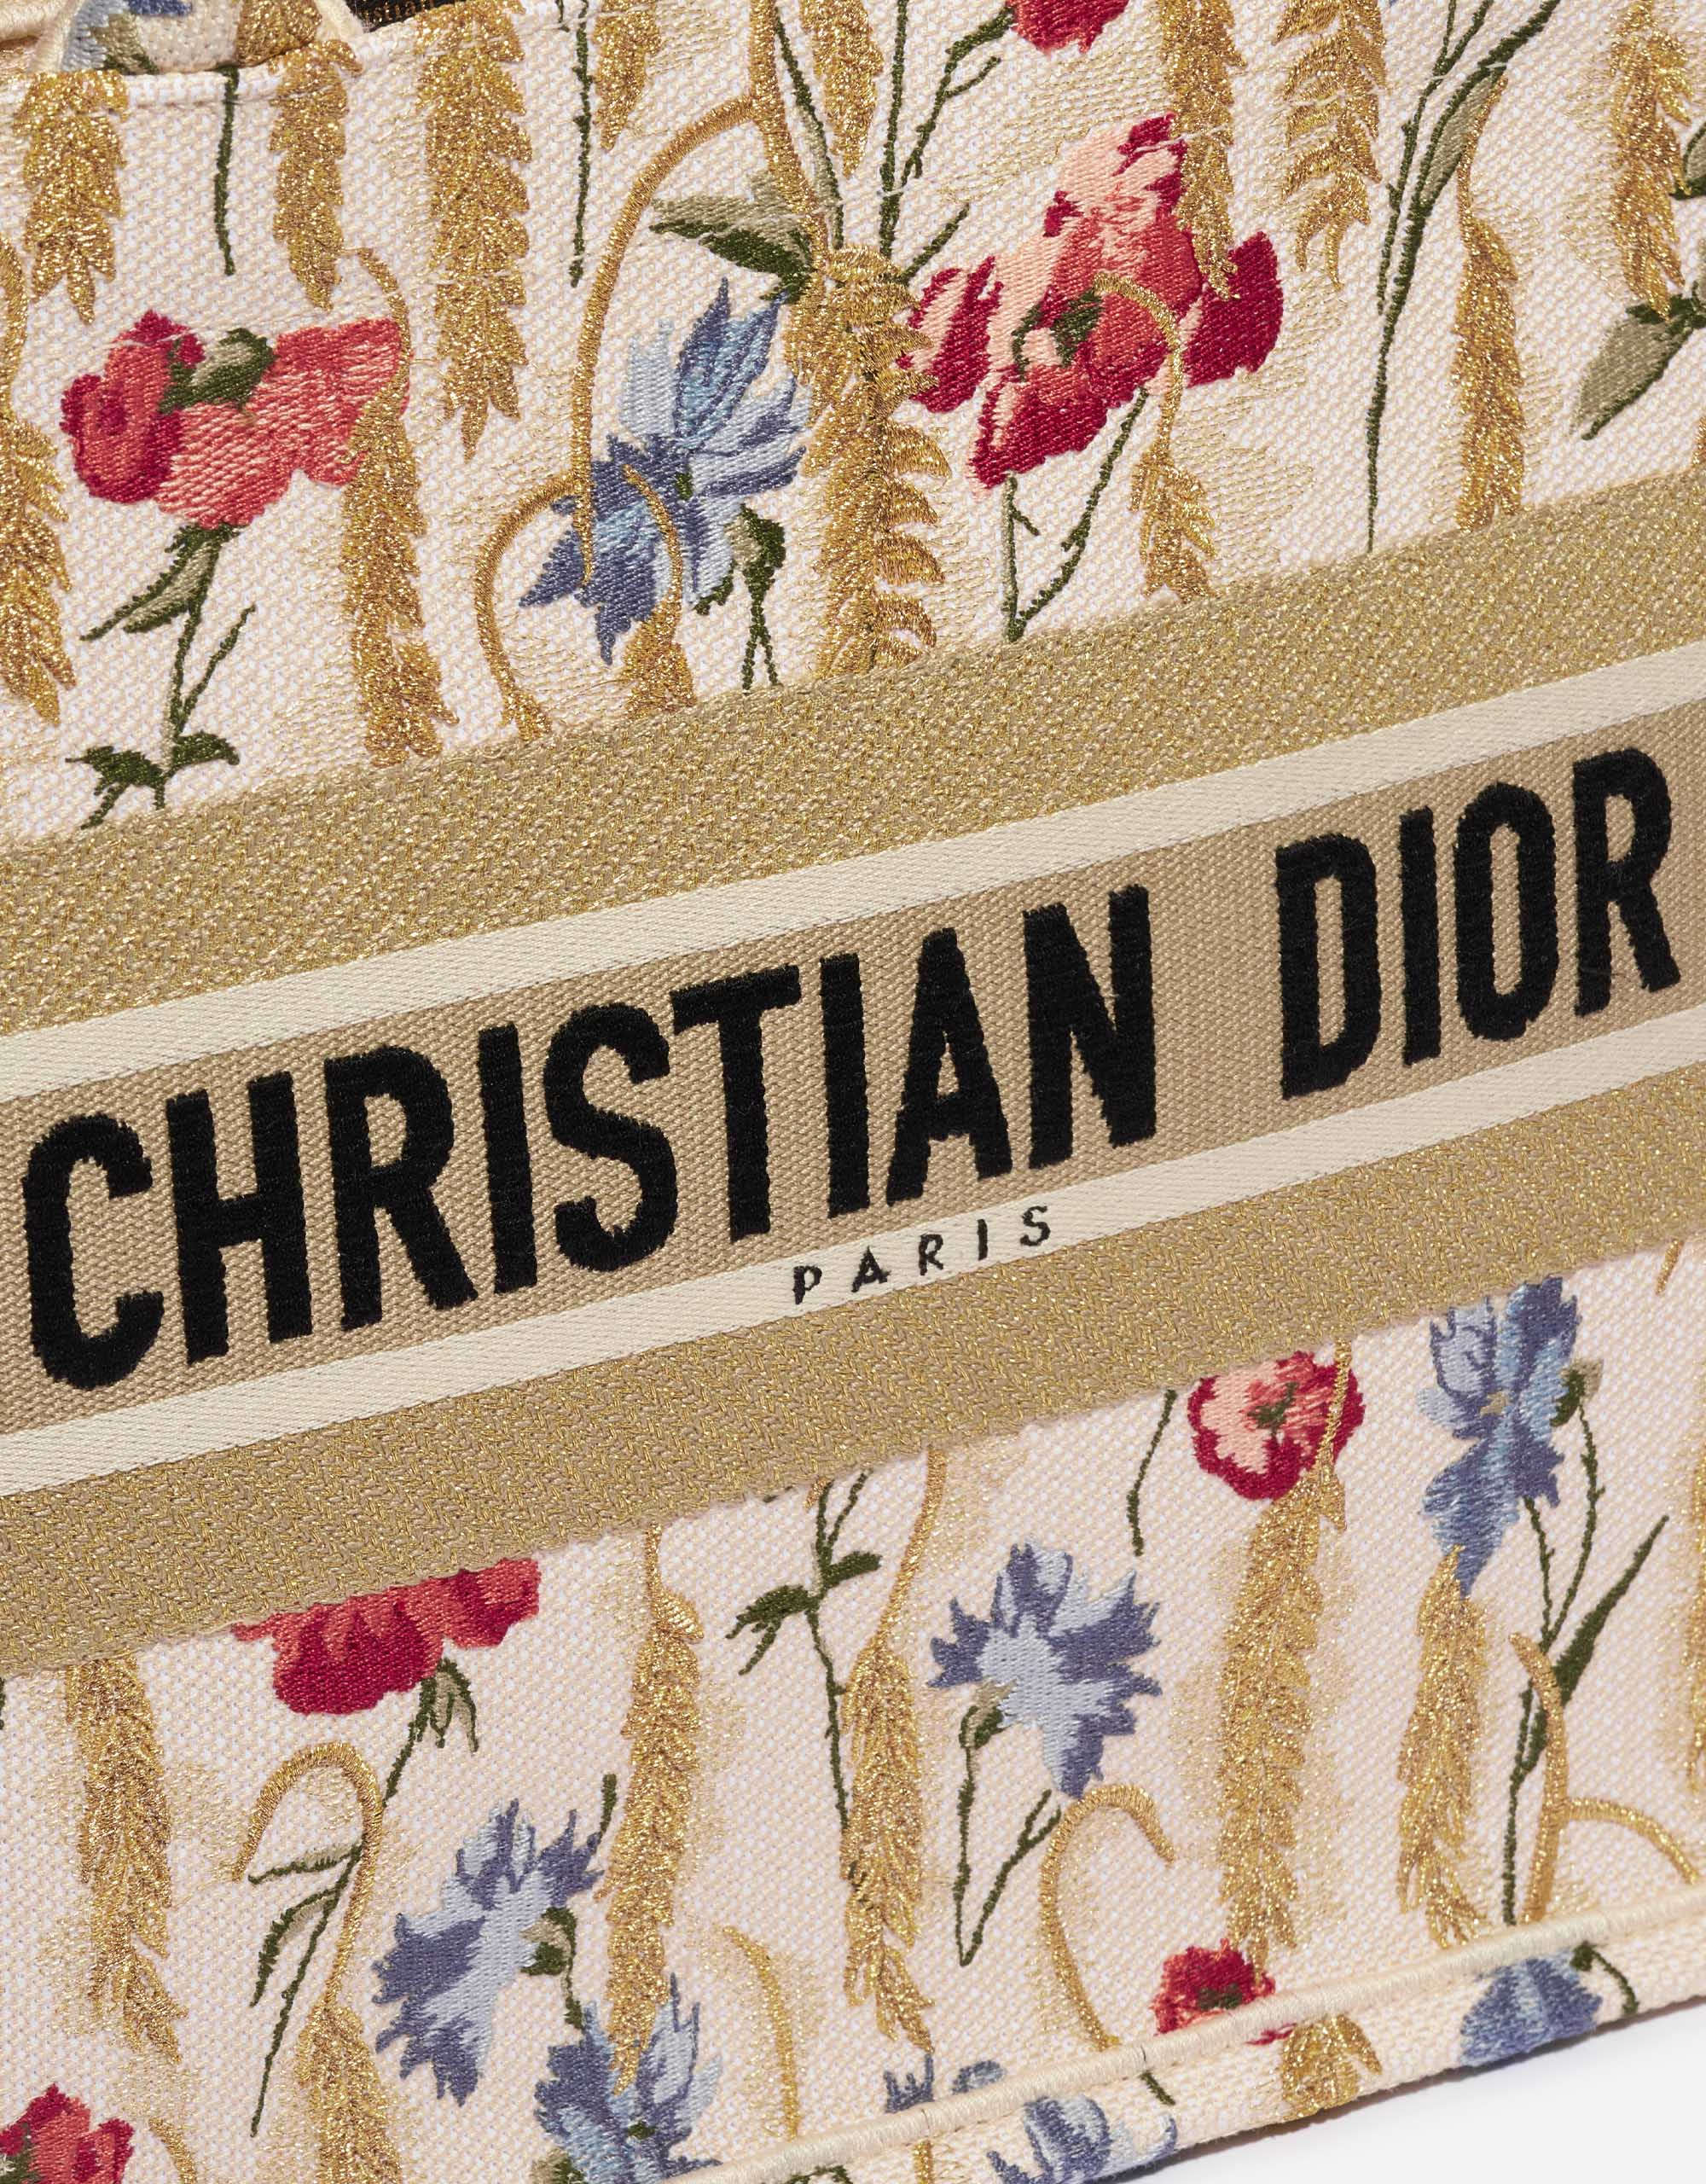 Christian Dior Book Tote In-Depth Review, What Fits inside and Pricing